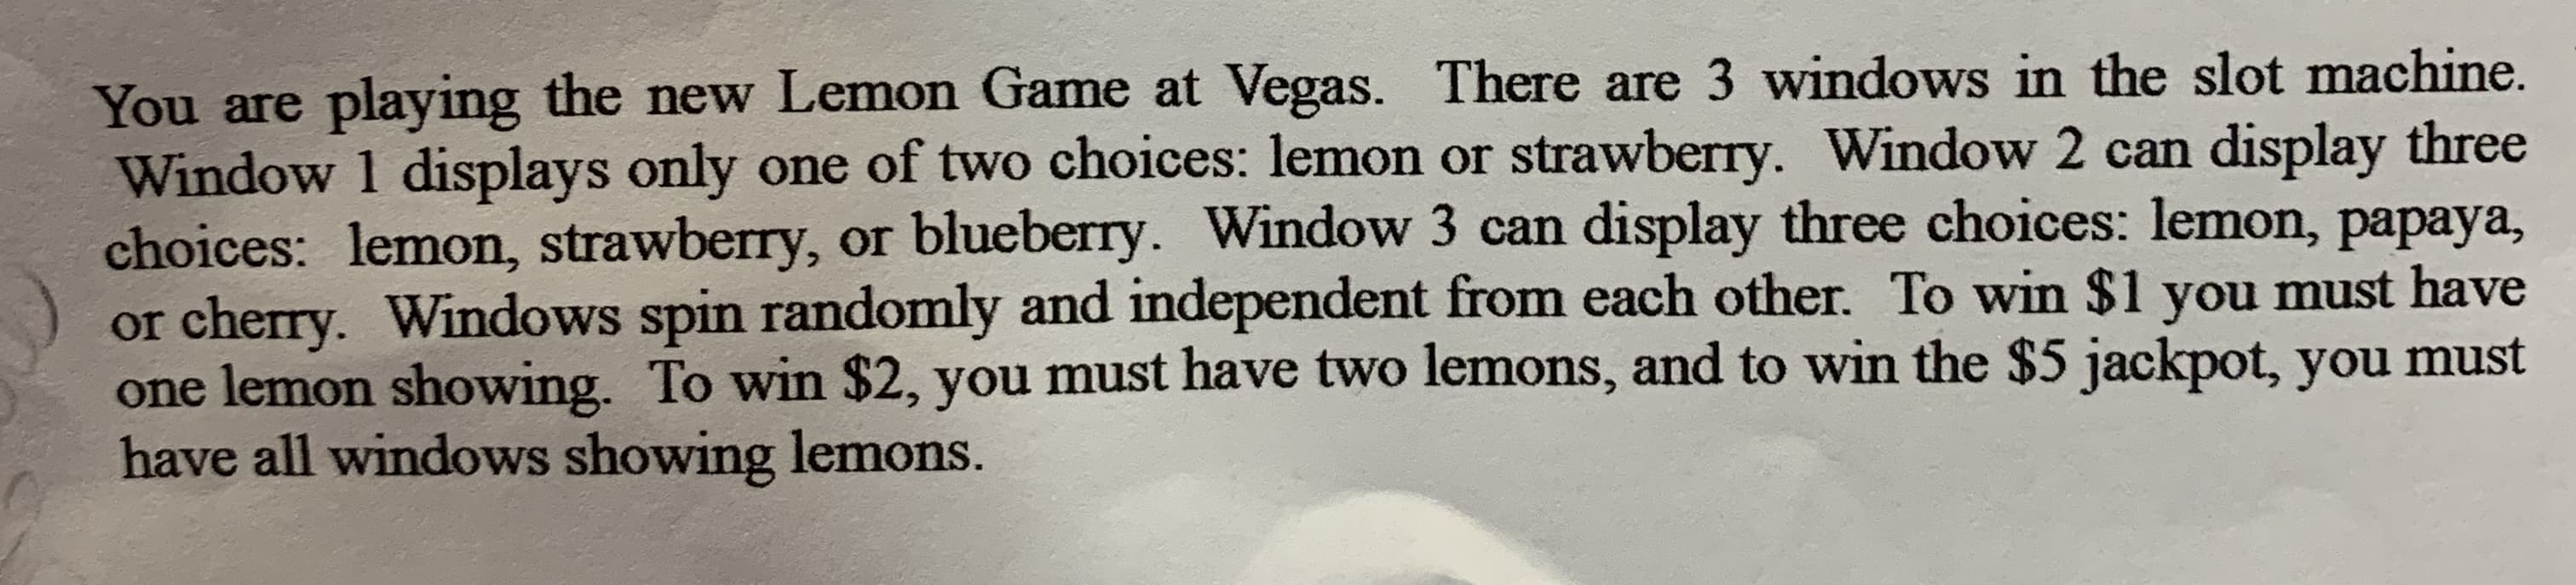 You are playing the new Lemon Game at Vegas. There are 3 windows in the slot machine.
Window 1 displays only one of two choices: lemon or strawberry. Window 2 can display three
choices: lemon, strawberry, or blueberry. Window 3 can display three choices: lemon, papaya,
or cherry. Windows spin randomly and independent from each other. To win $1 you must have
one lemon showing. To win $2, you must have two lemons, and to win the $5 jackpot, you must
have all windows showing lemons.
